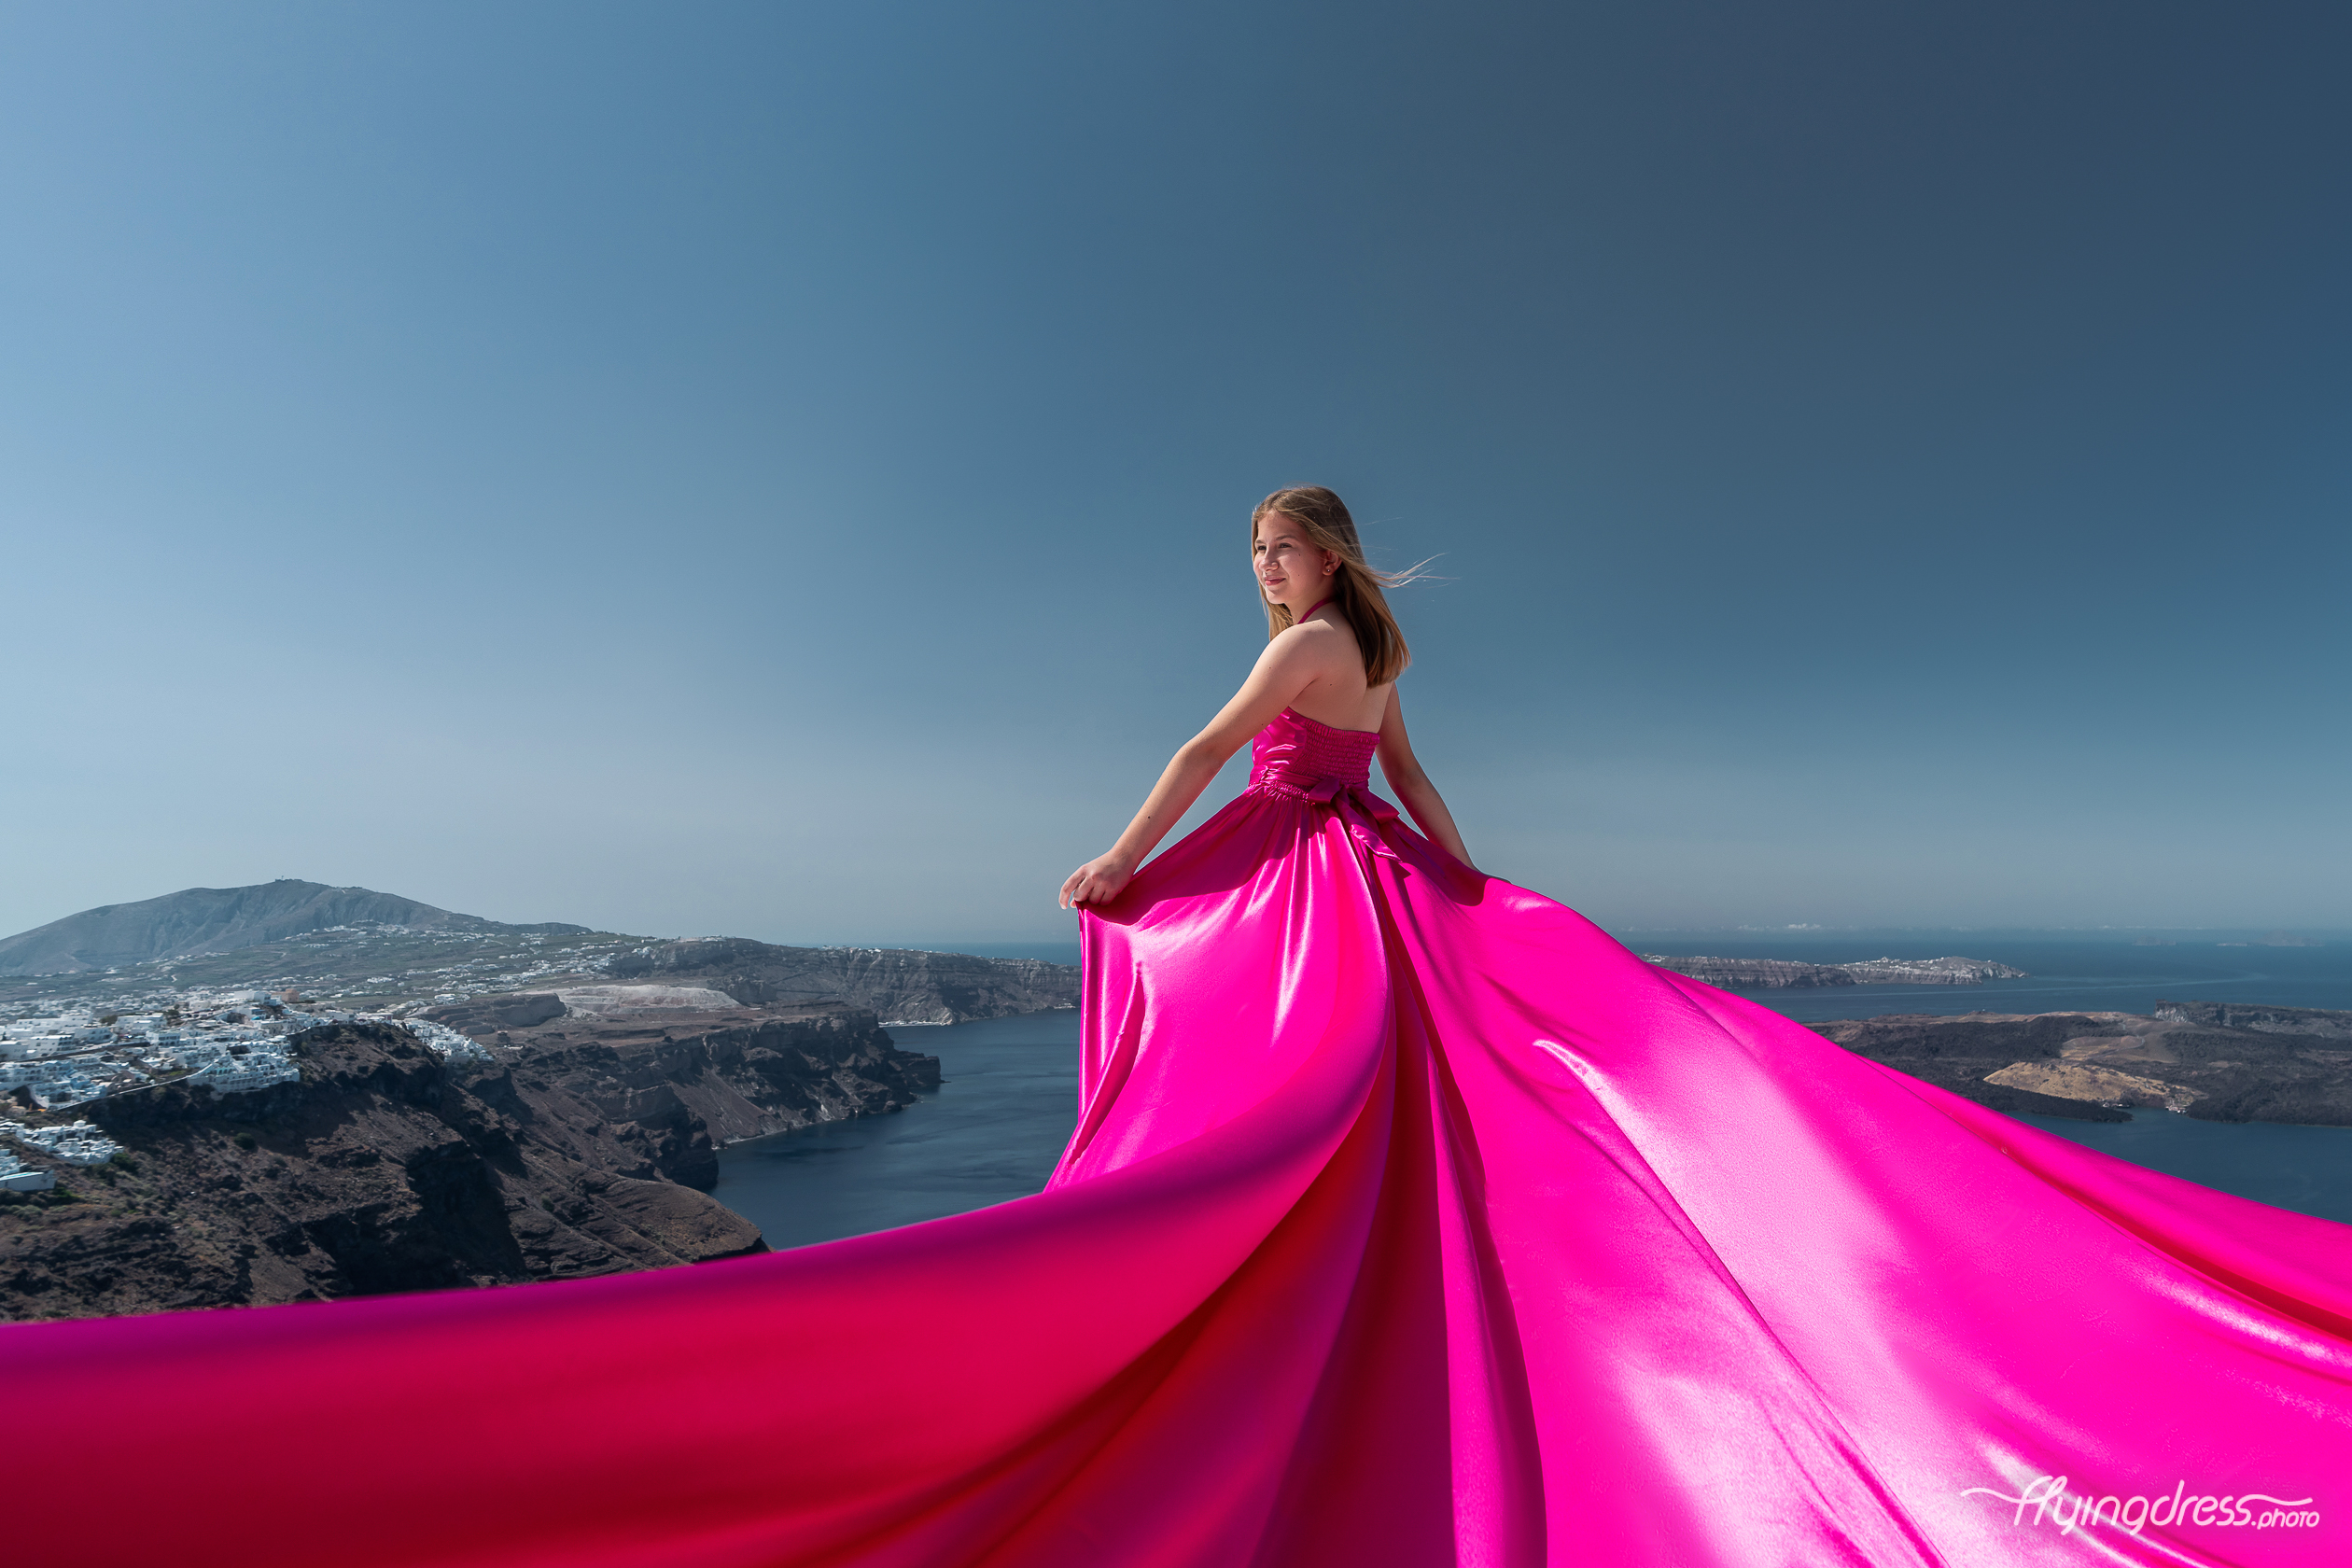 A girl in a stunning pink dress stands with the flowing train of her gown cascading behind her, set against the breathtaking coastal landscape of Santorini, Greece.